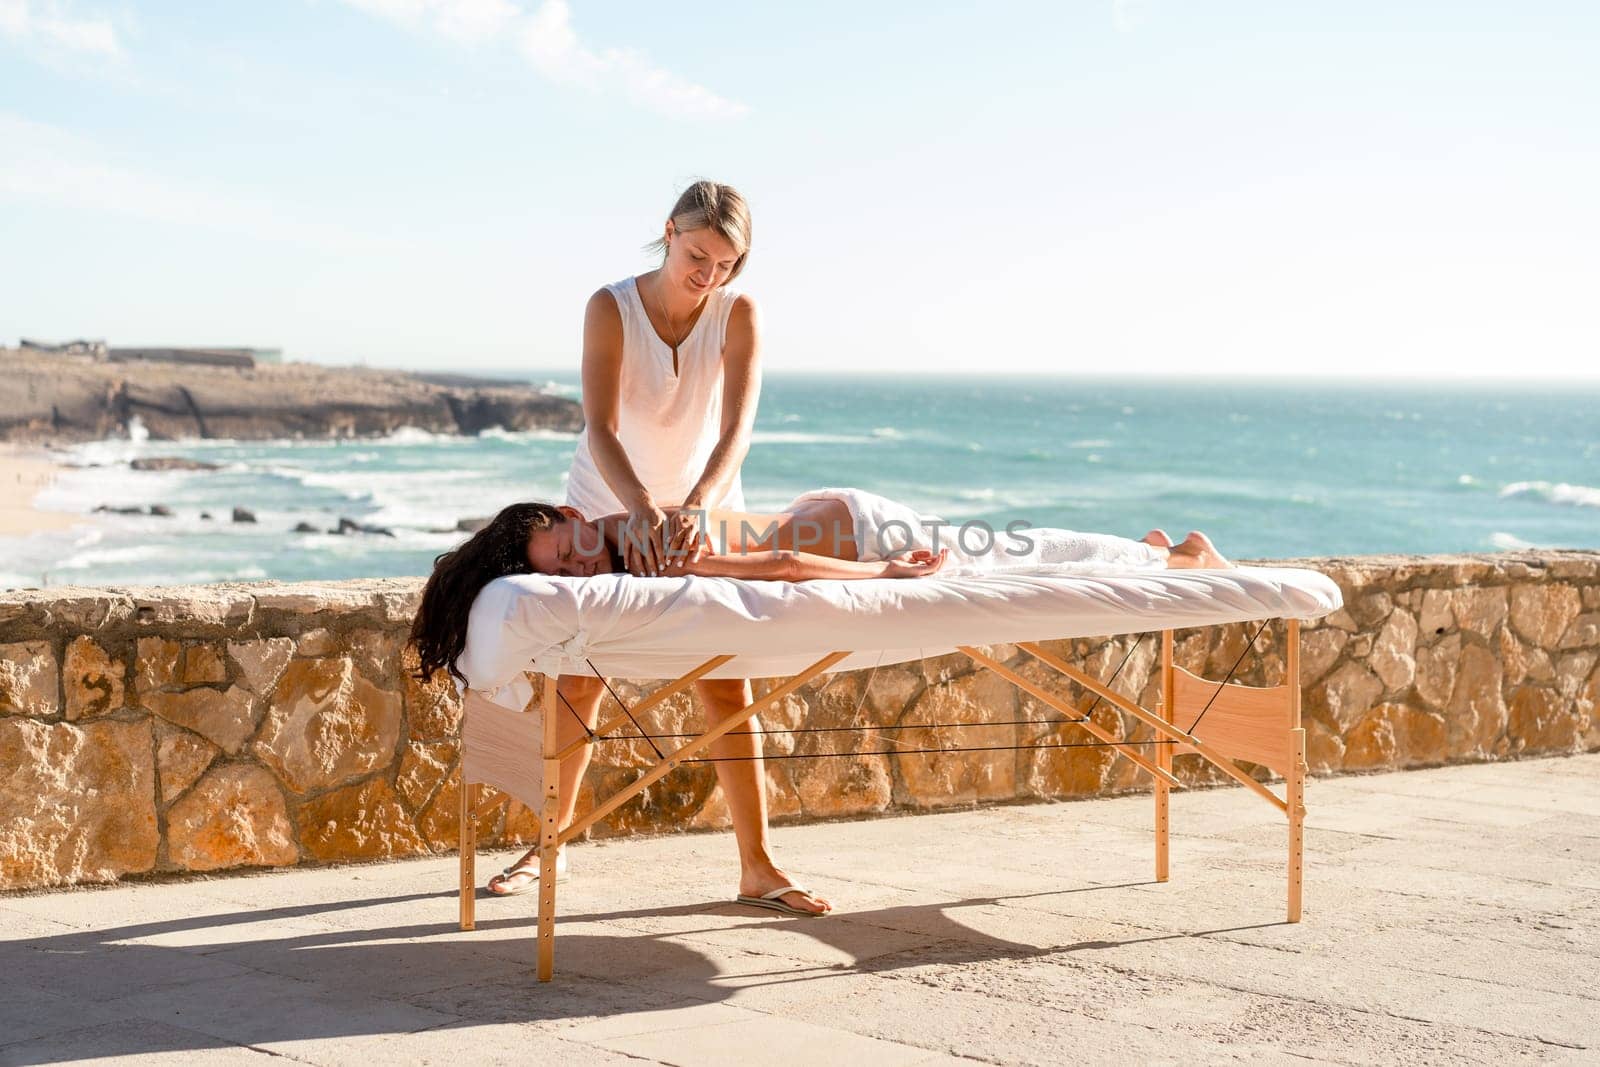 Tanned brunette woman relaxing during spa treatment on ocean shore. Woman lying on massage table and getting professional back massage, beach and turquoise waves background